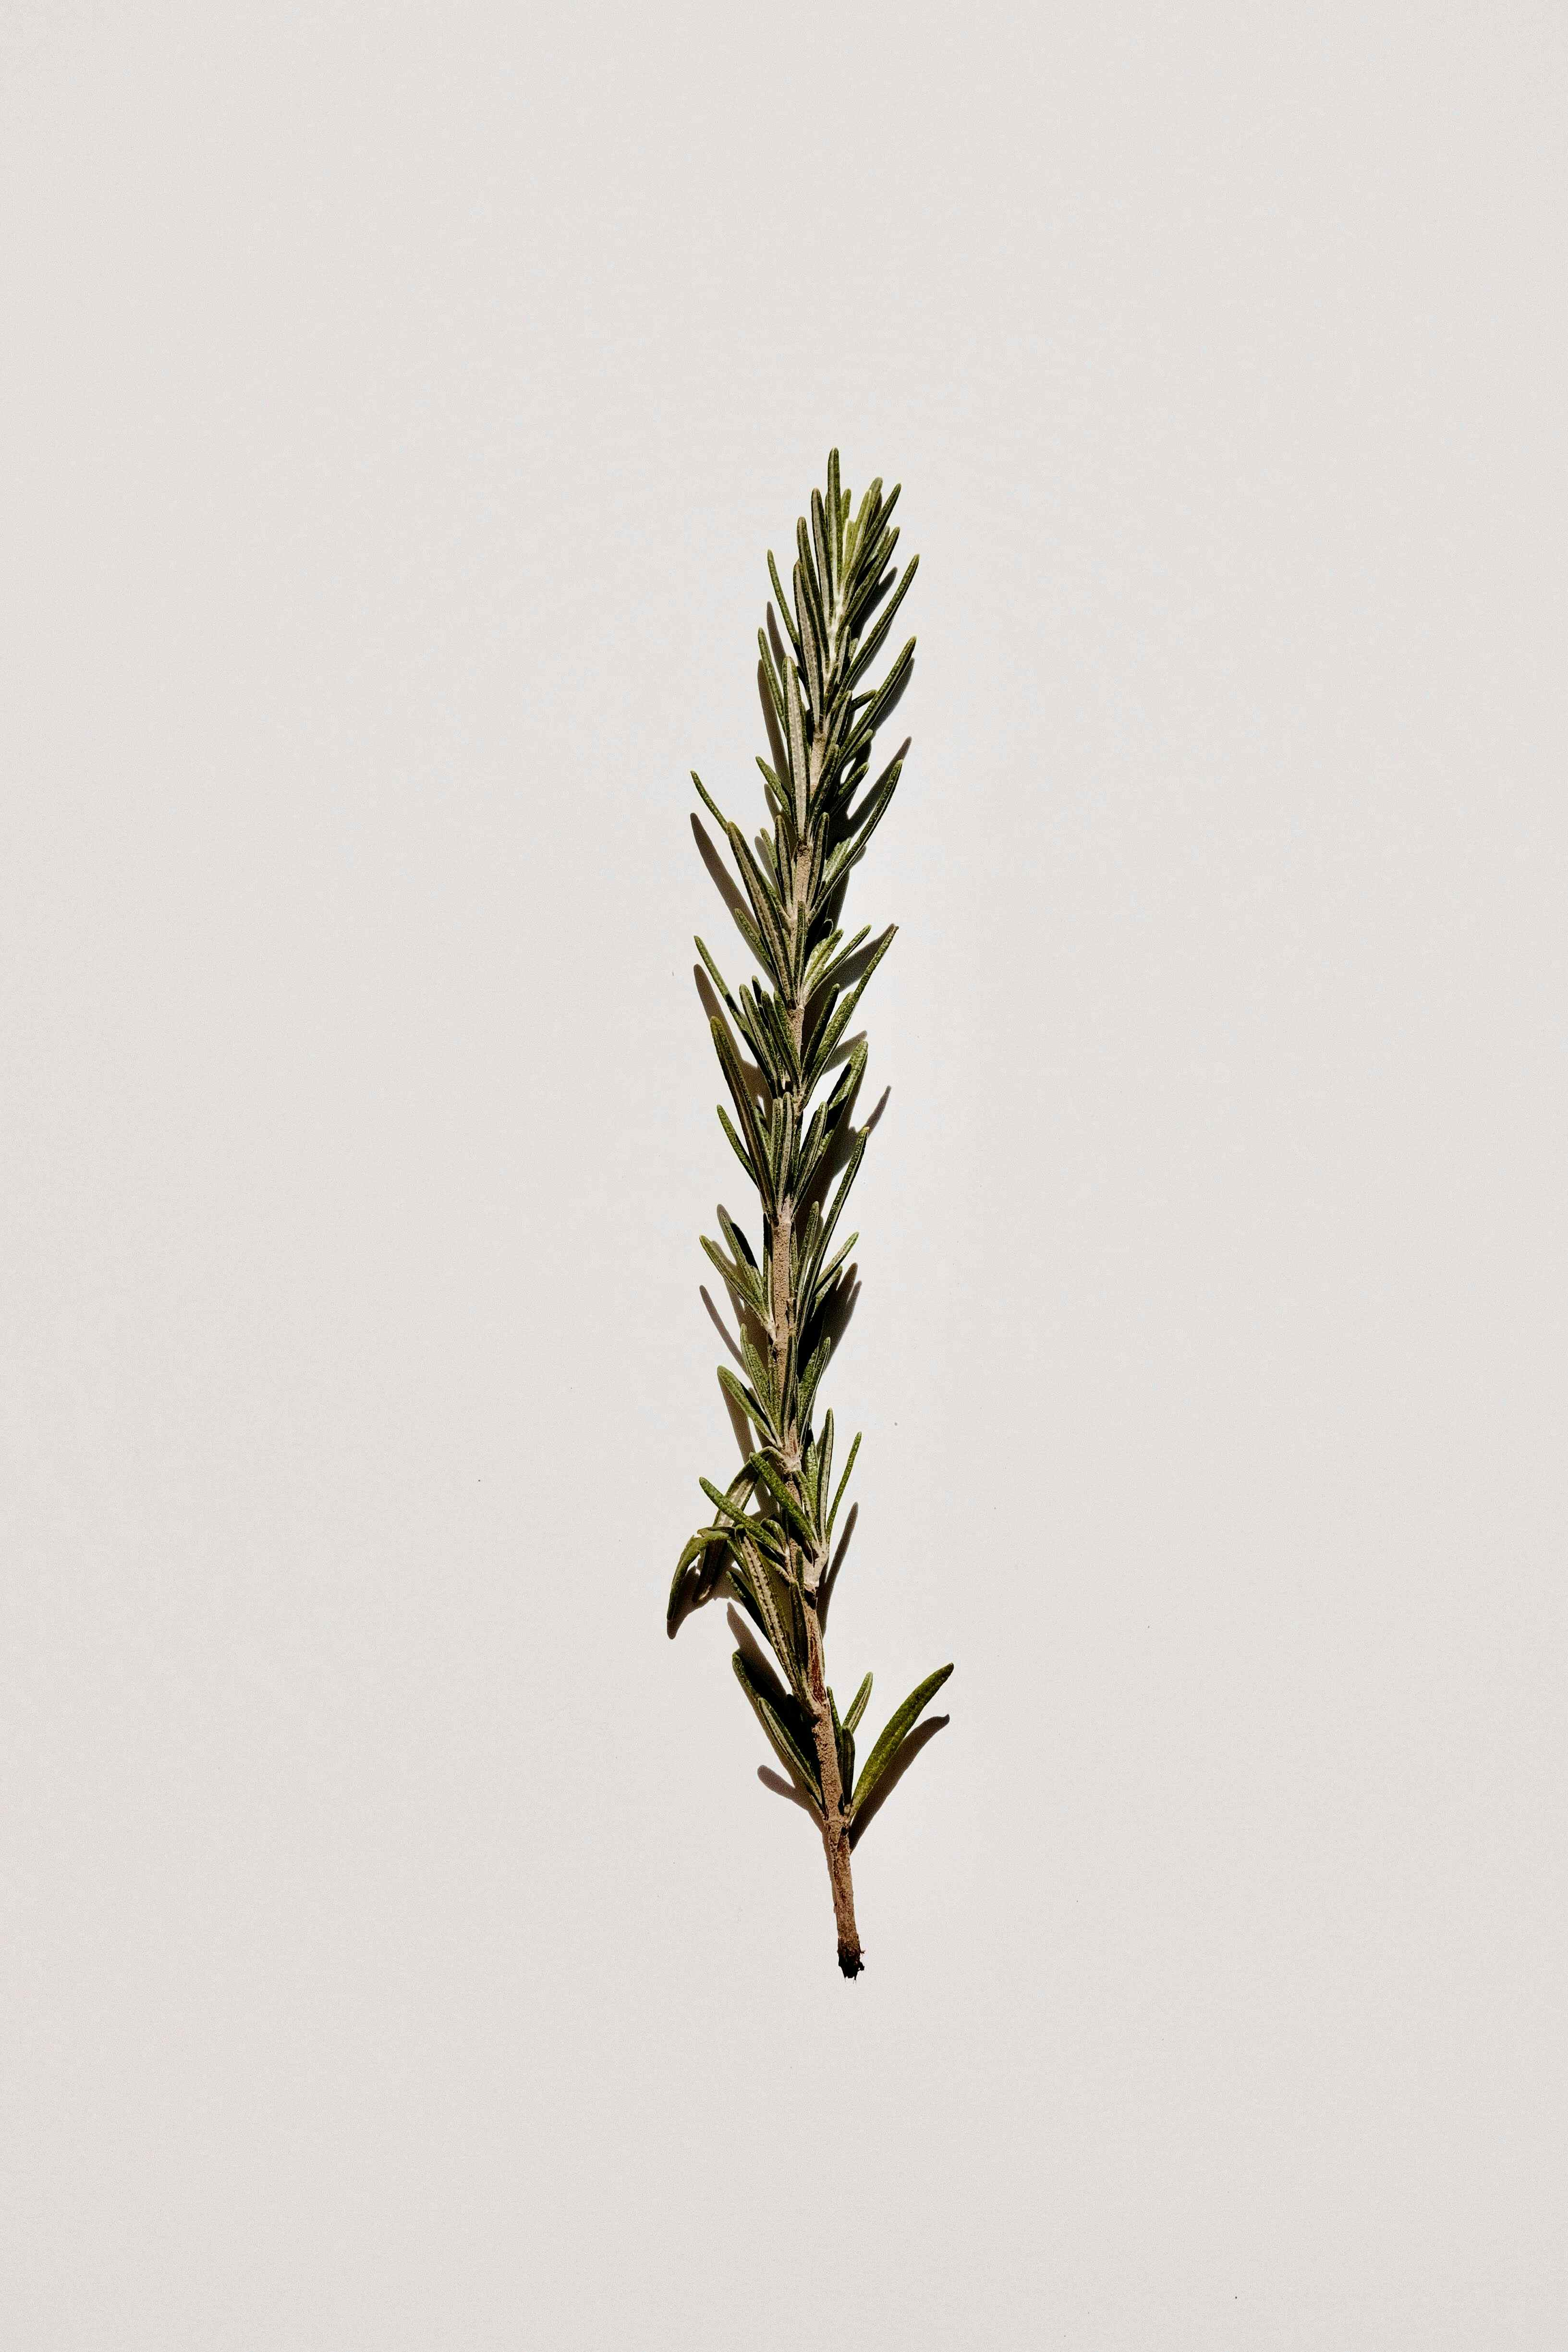 Rosemary - a herb used in a variety of our dishes